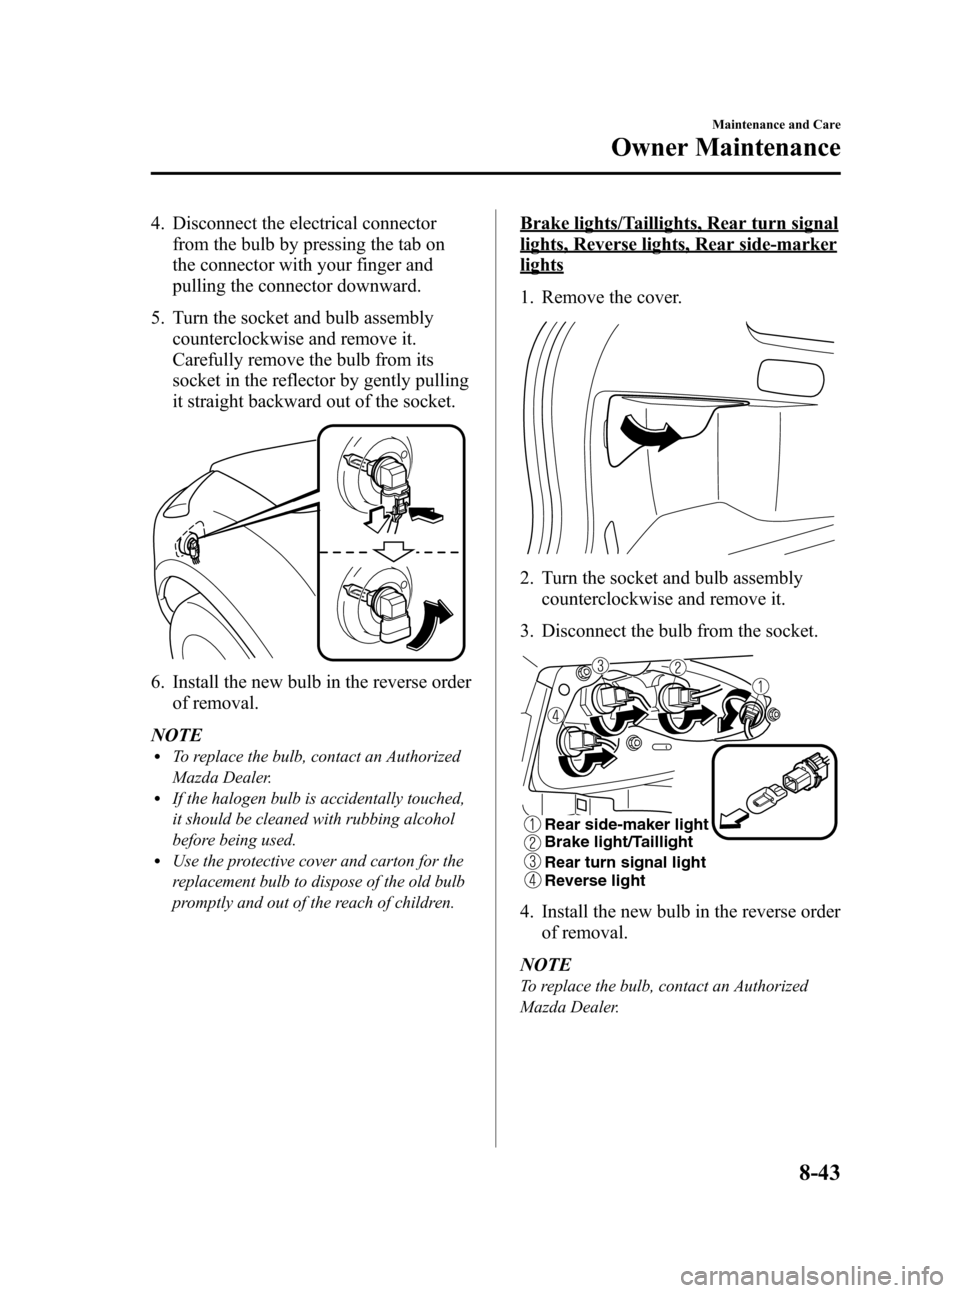 MAZDA MODEL CX-7 2009  Owners Manual (in English) Black plate (379,1)
4. Disconnect the electrical connector
from the bulb by pressing the tab on
the connector with your finger and
pulling the connector downward.
5. Turn the socket and bulb assembly
